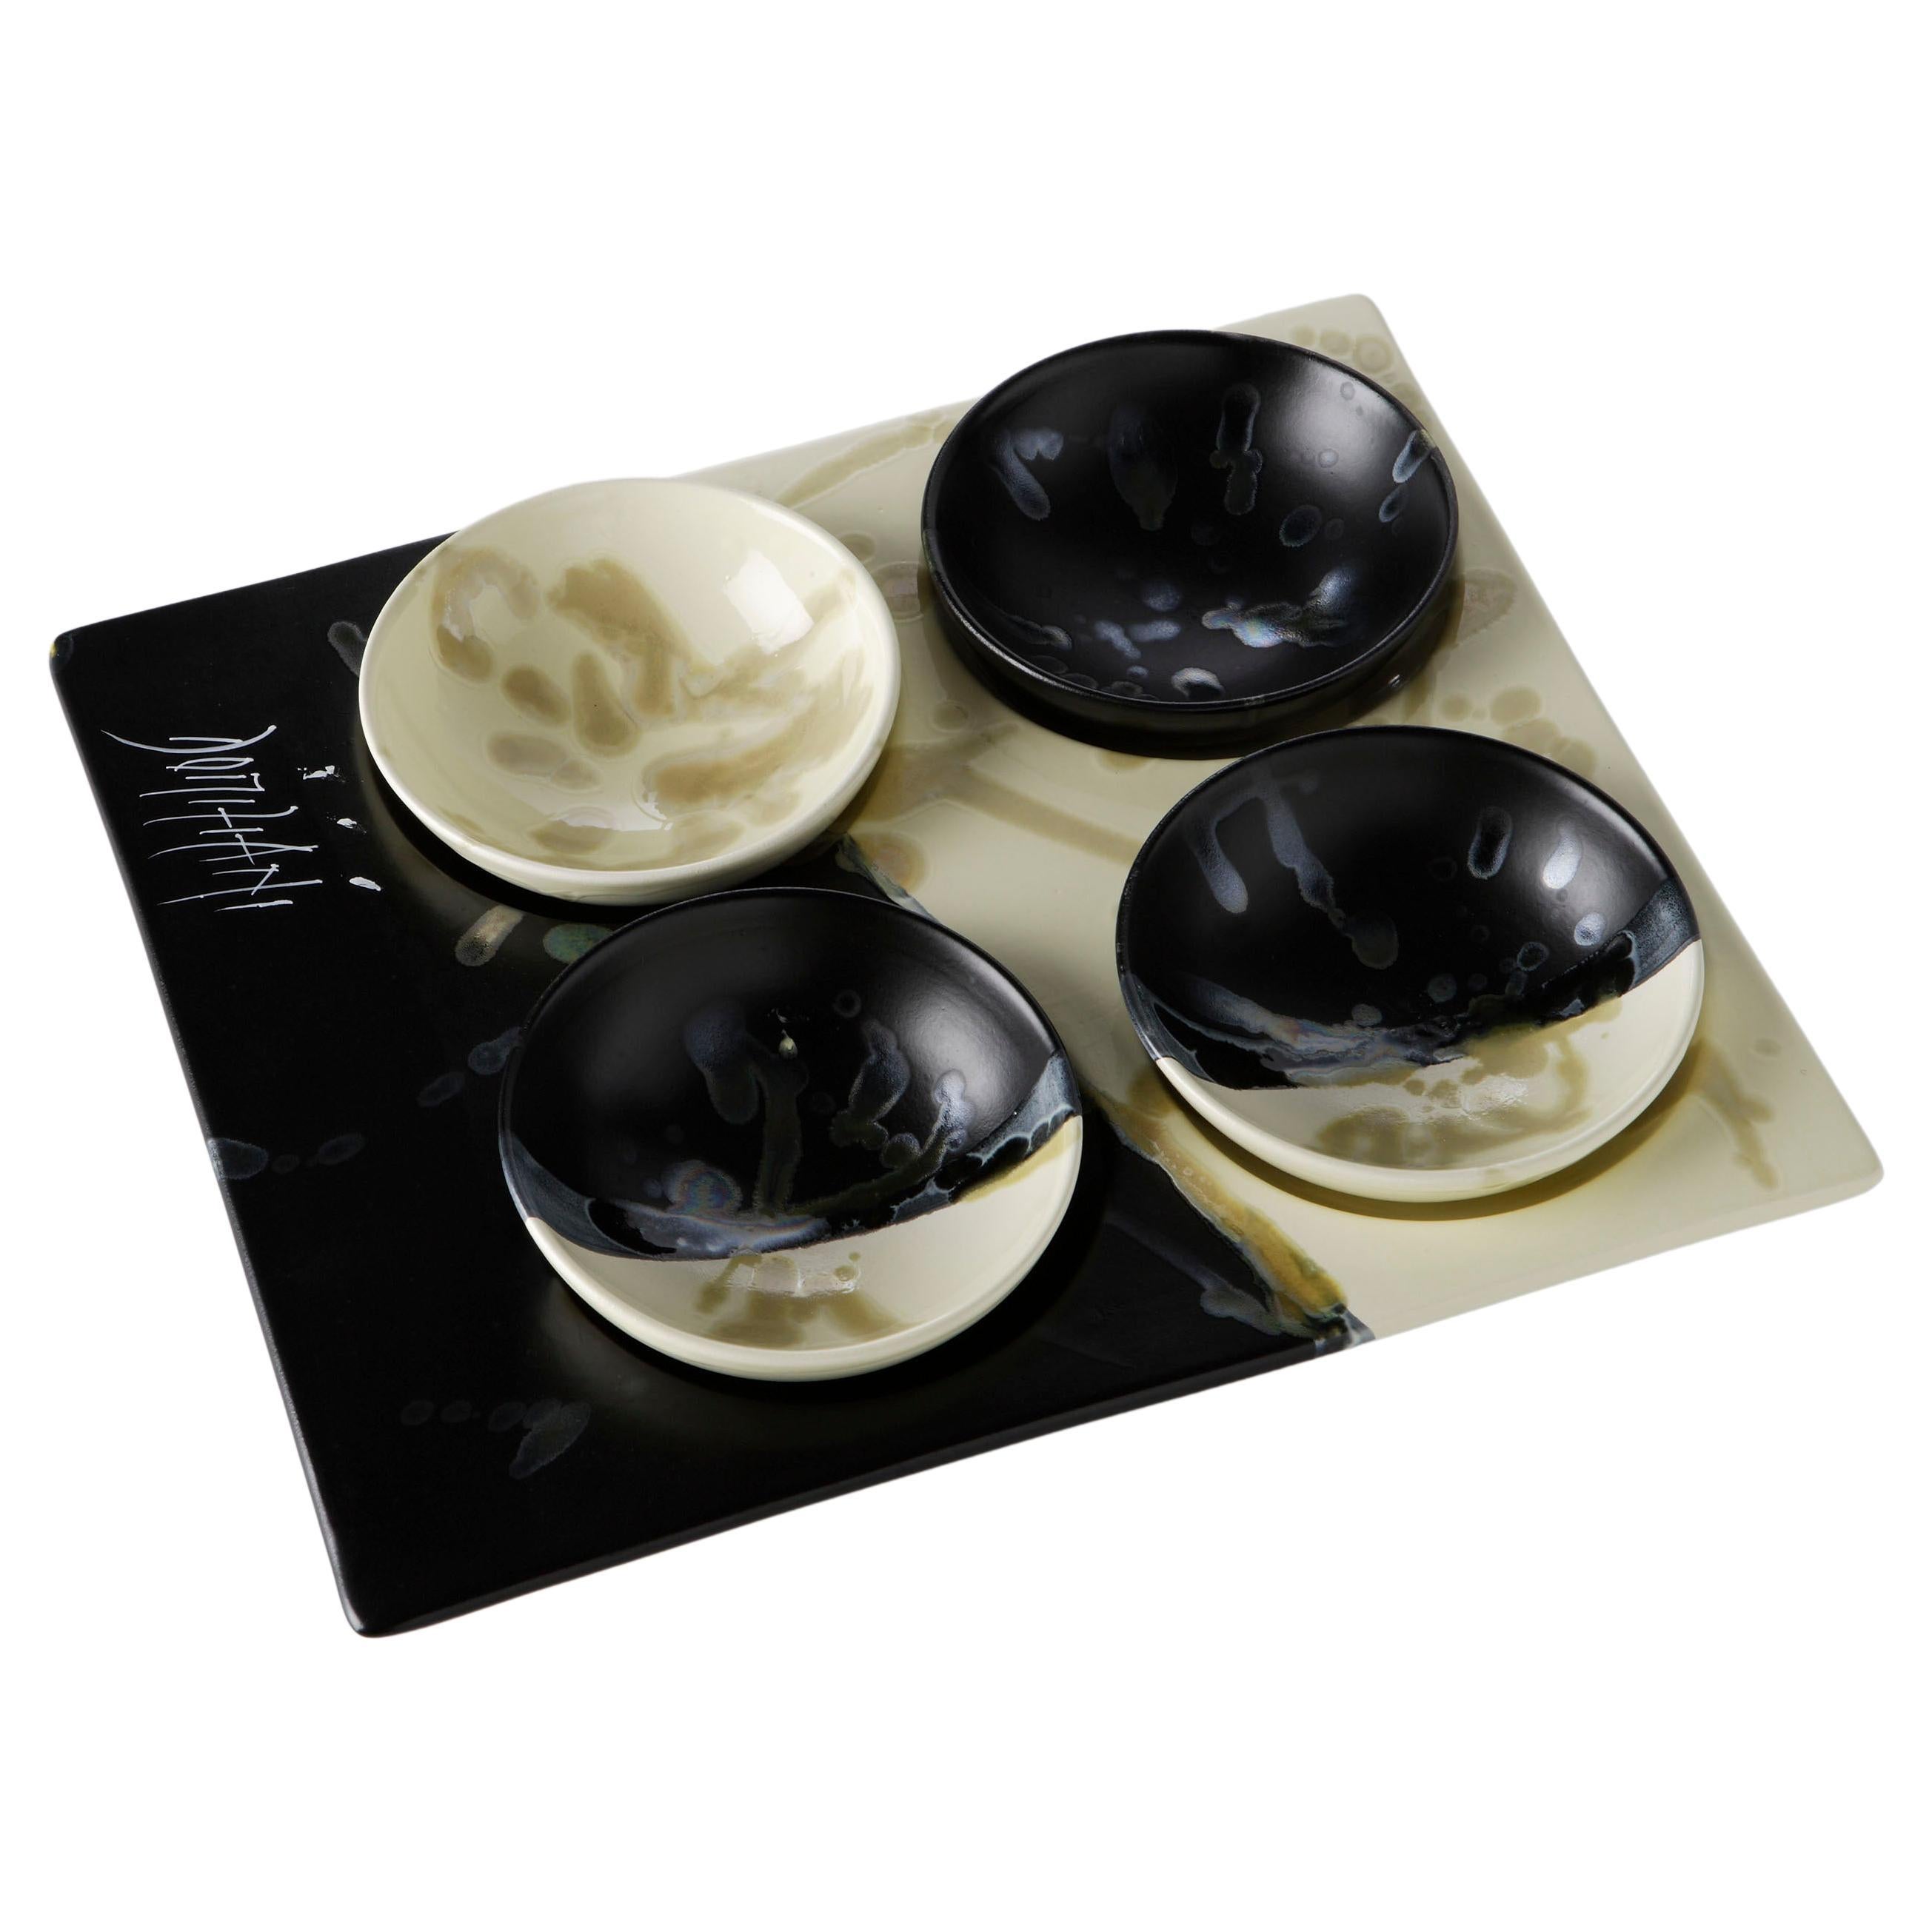 Mosche Bianche Platters and Serveware